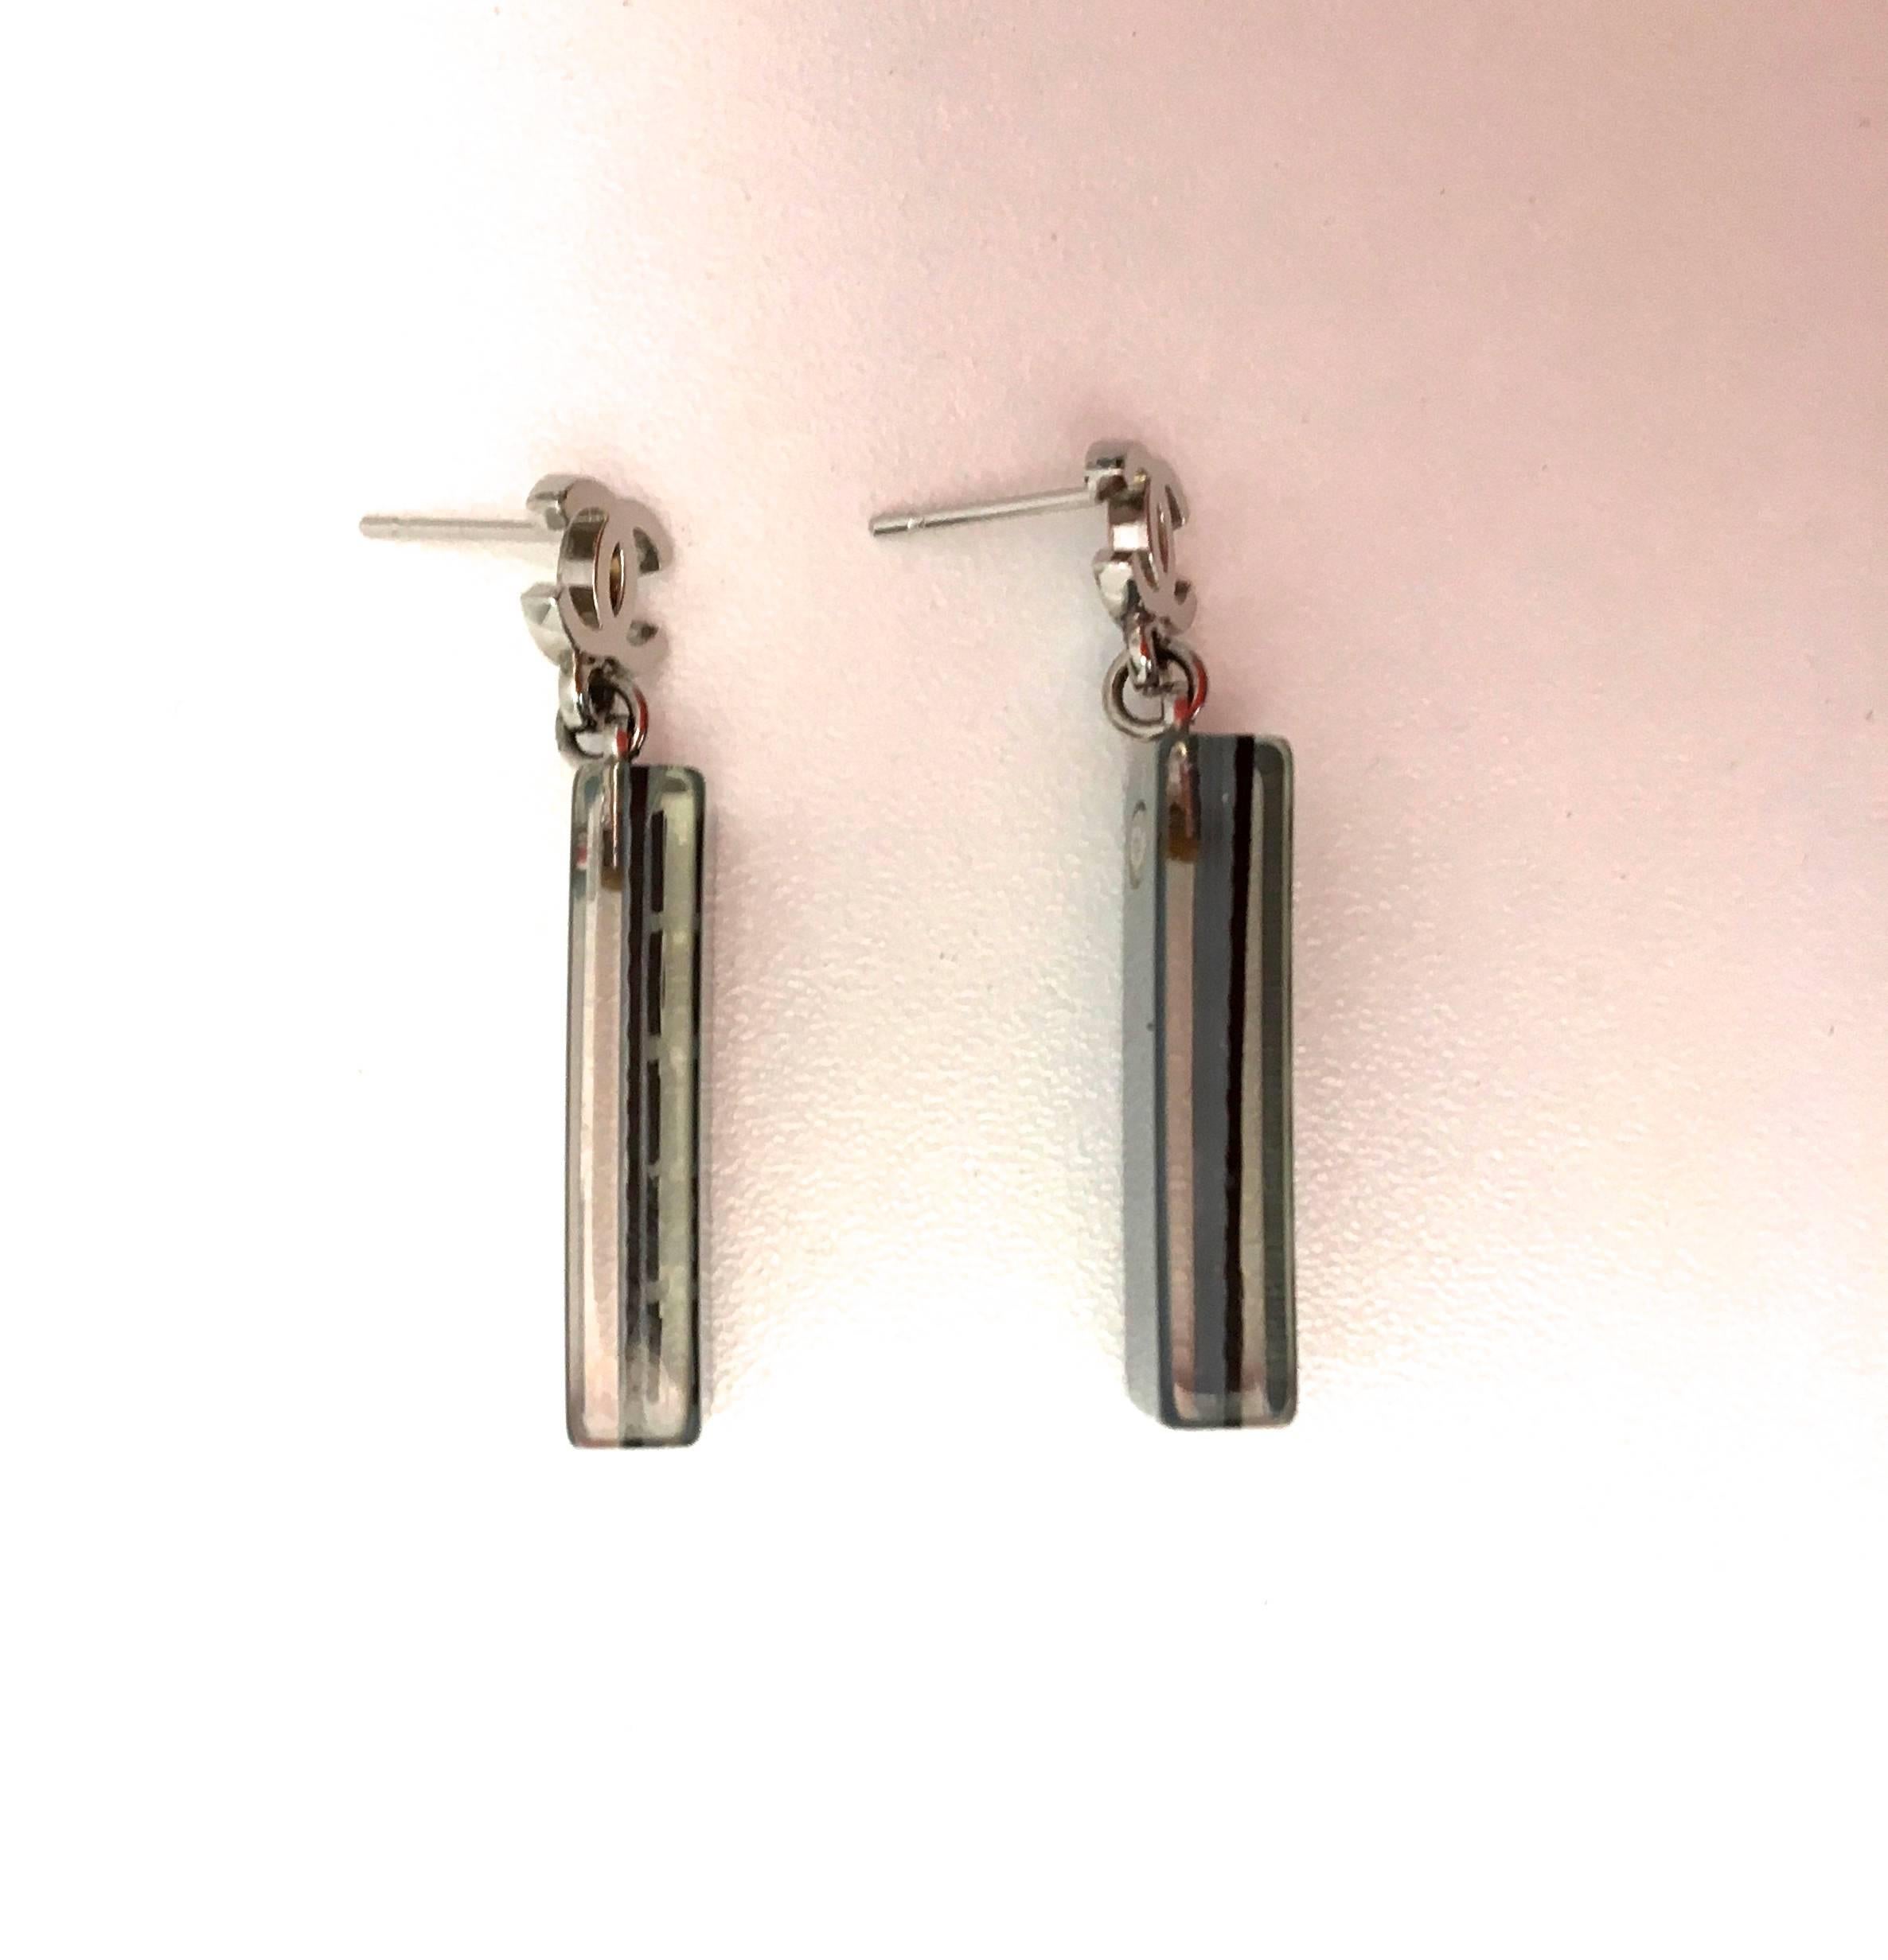 New Chanel Lucite Earrings - 'Votez Coco' - 2015 1